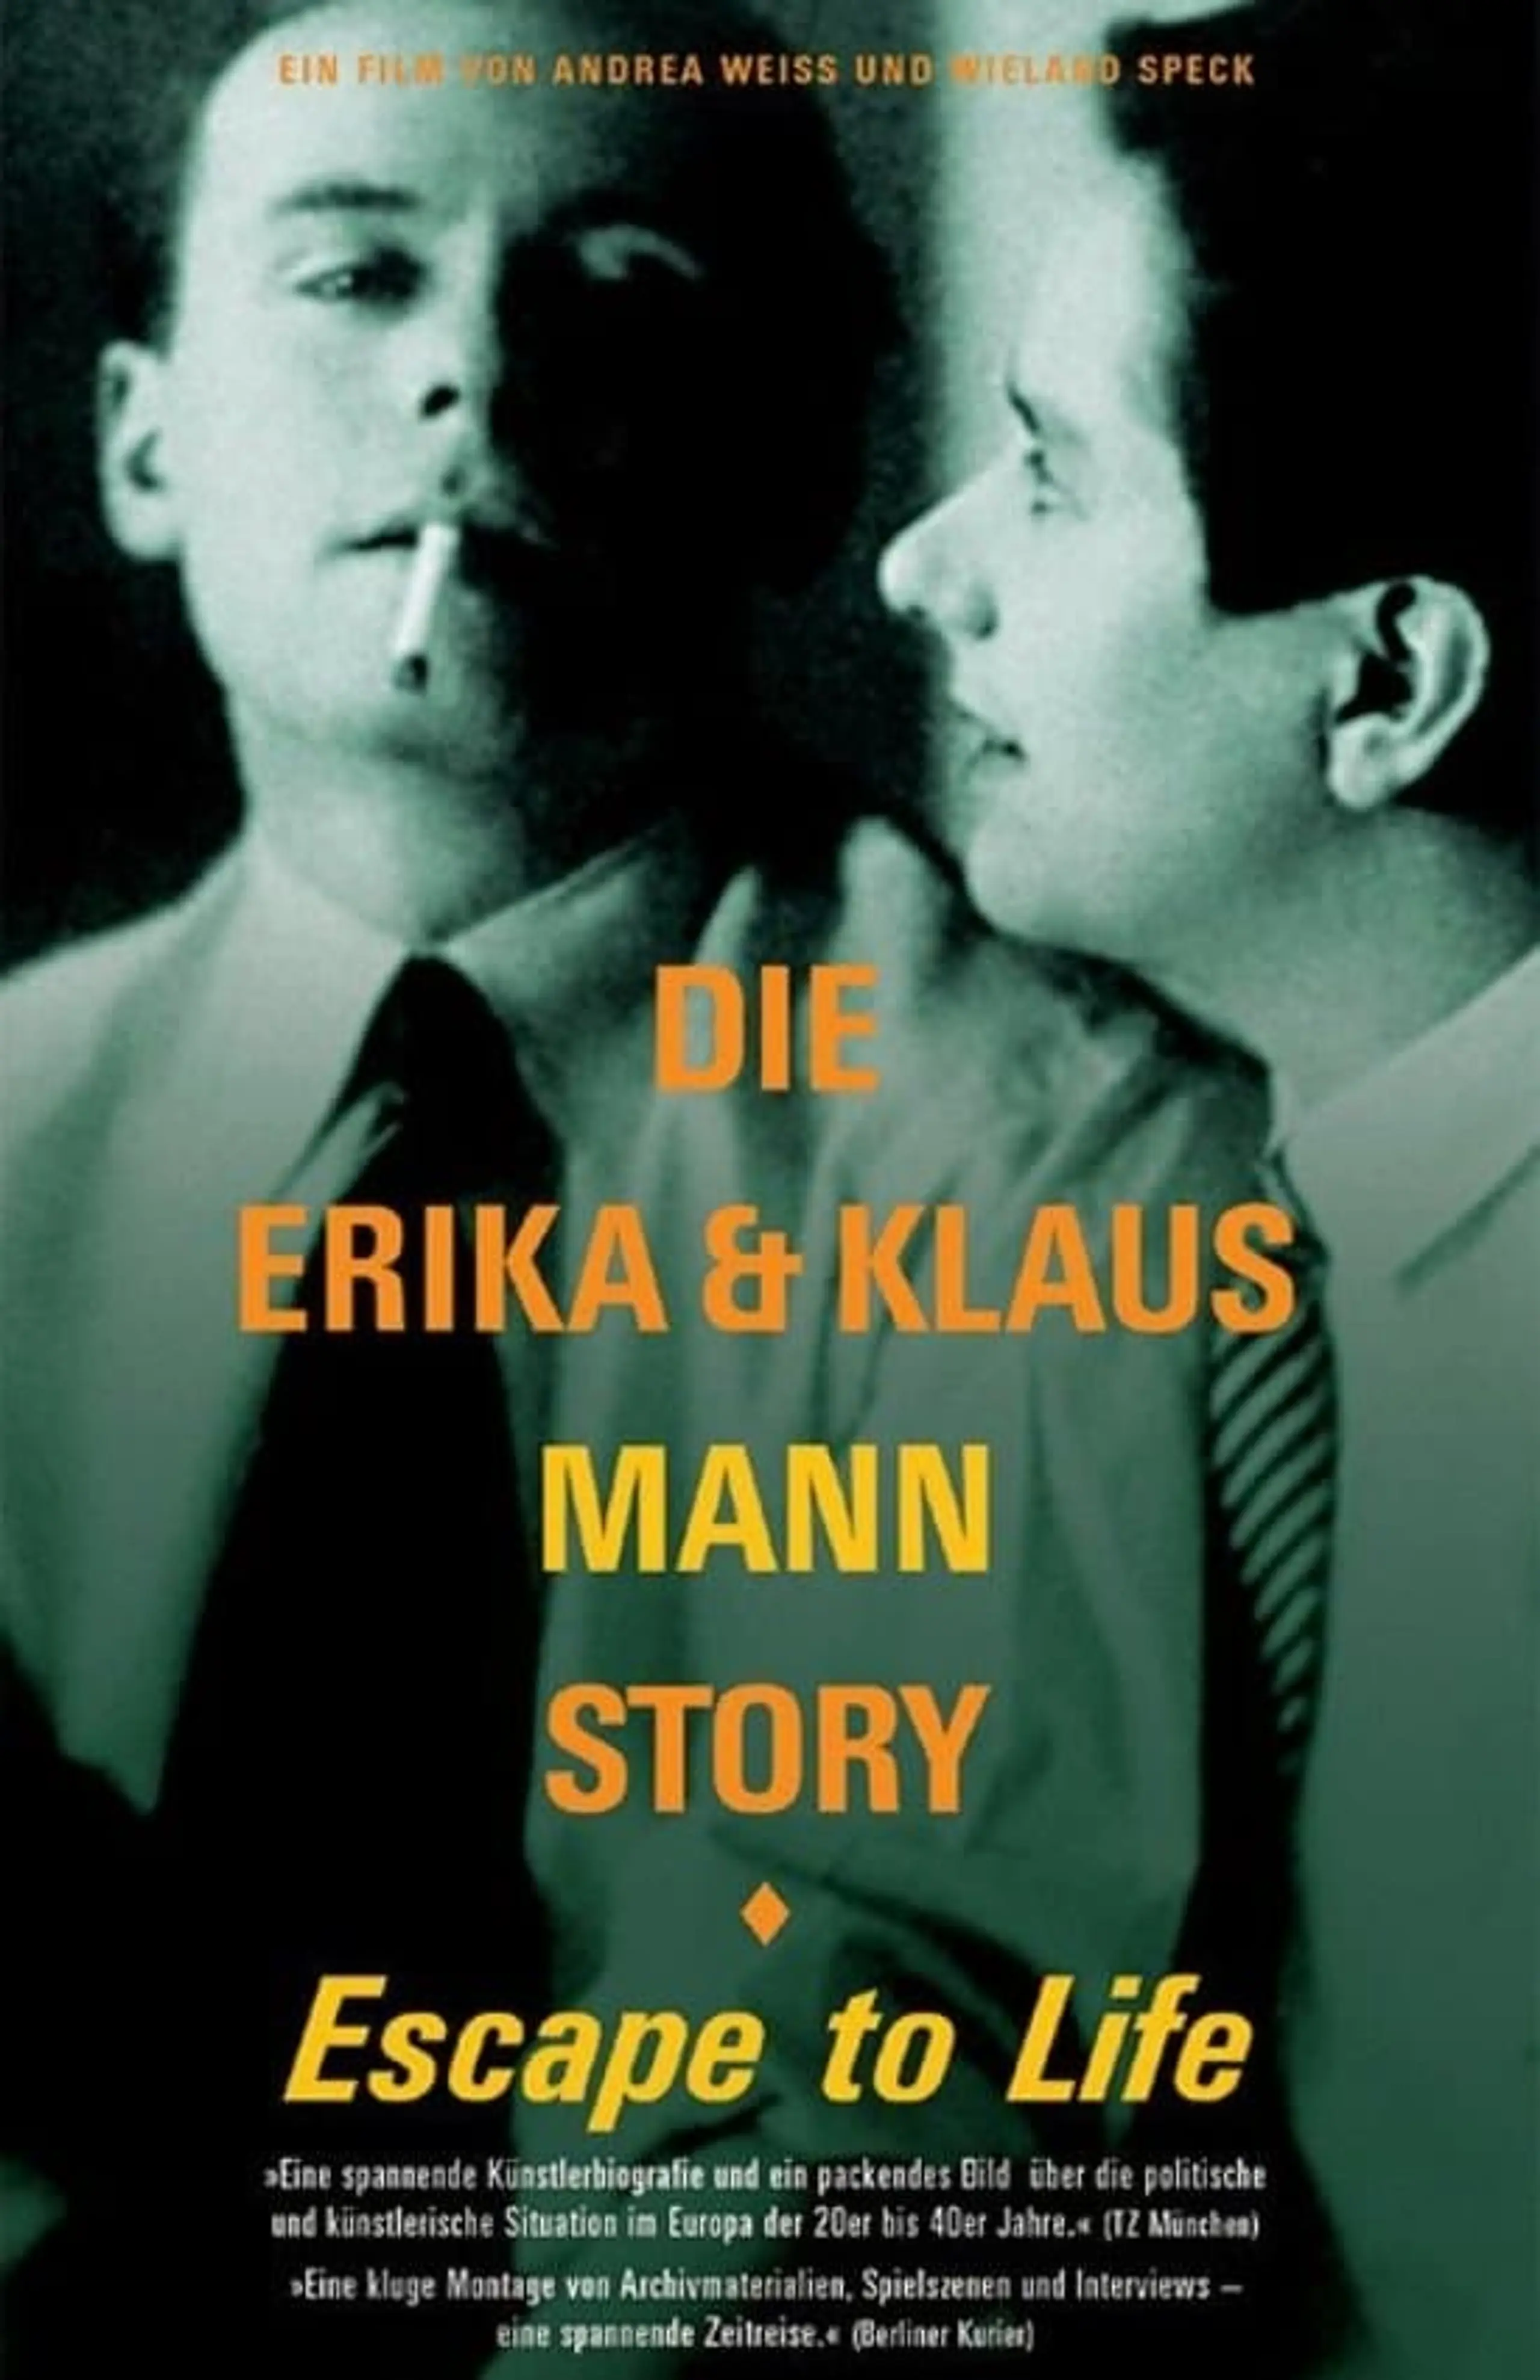 Escape to Life: The Erika and Klaus Mann Story